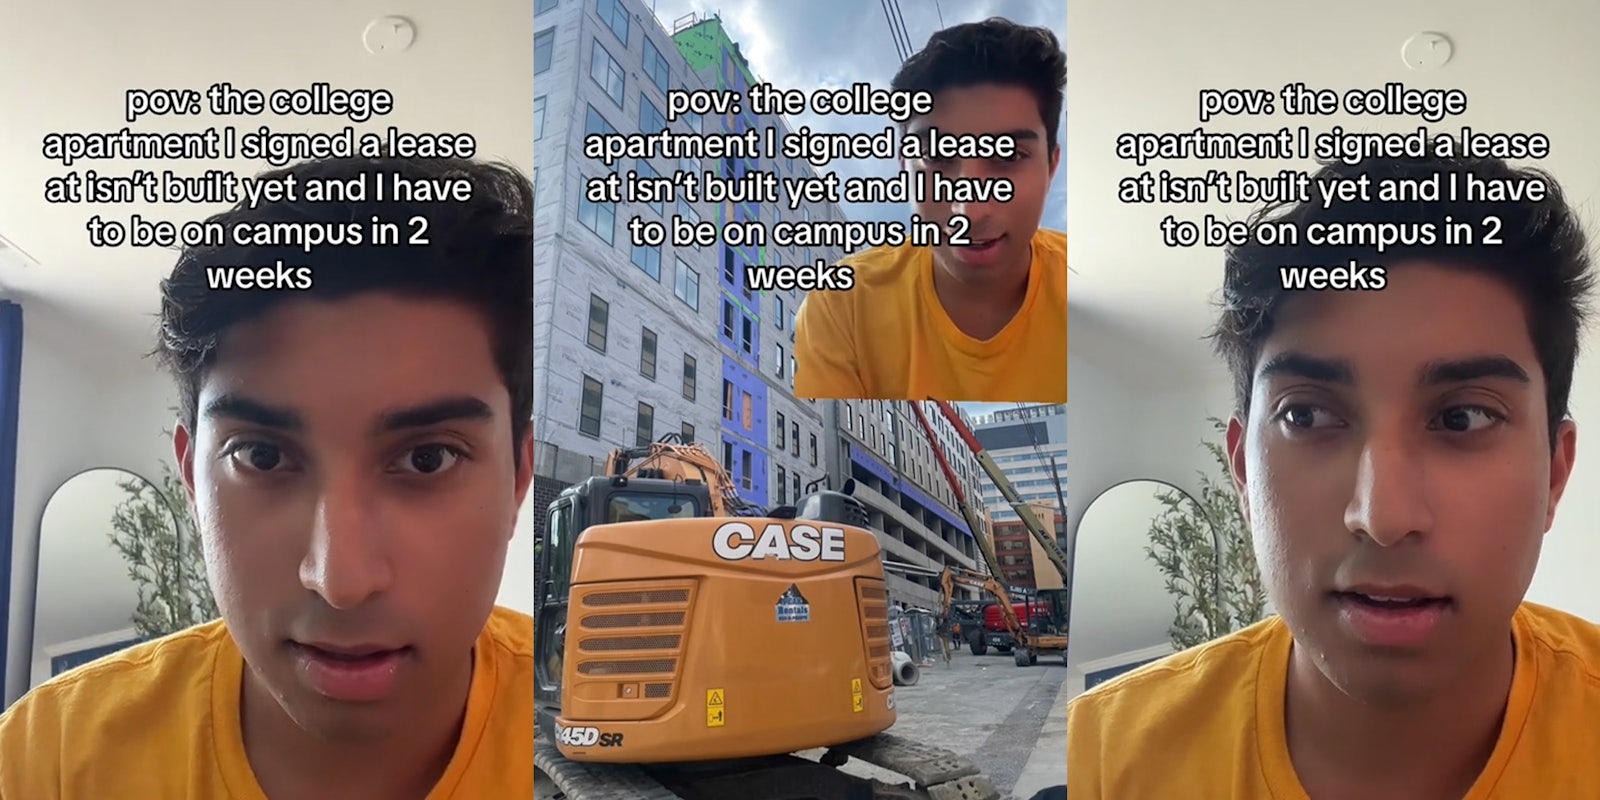 student with caption 'pov: the college apartment I signed a lease at isn't built yet and I have to be on campus in 2 weeks' (l) student greenscreen TikTok over construction image with caption 'pov: the college apartment I signed a lease at isn't built yet and I have to be on campus in 2 weeks' (c) student with caption 'pov: the college apartment I signed a lease at isn't built yet and I have to be on campus in 2 weeks' (r)